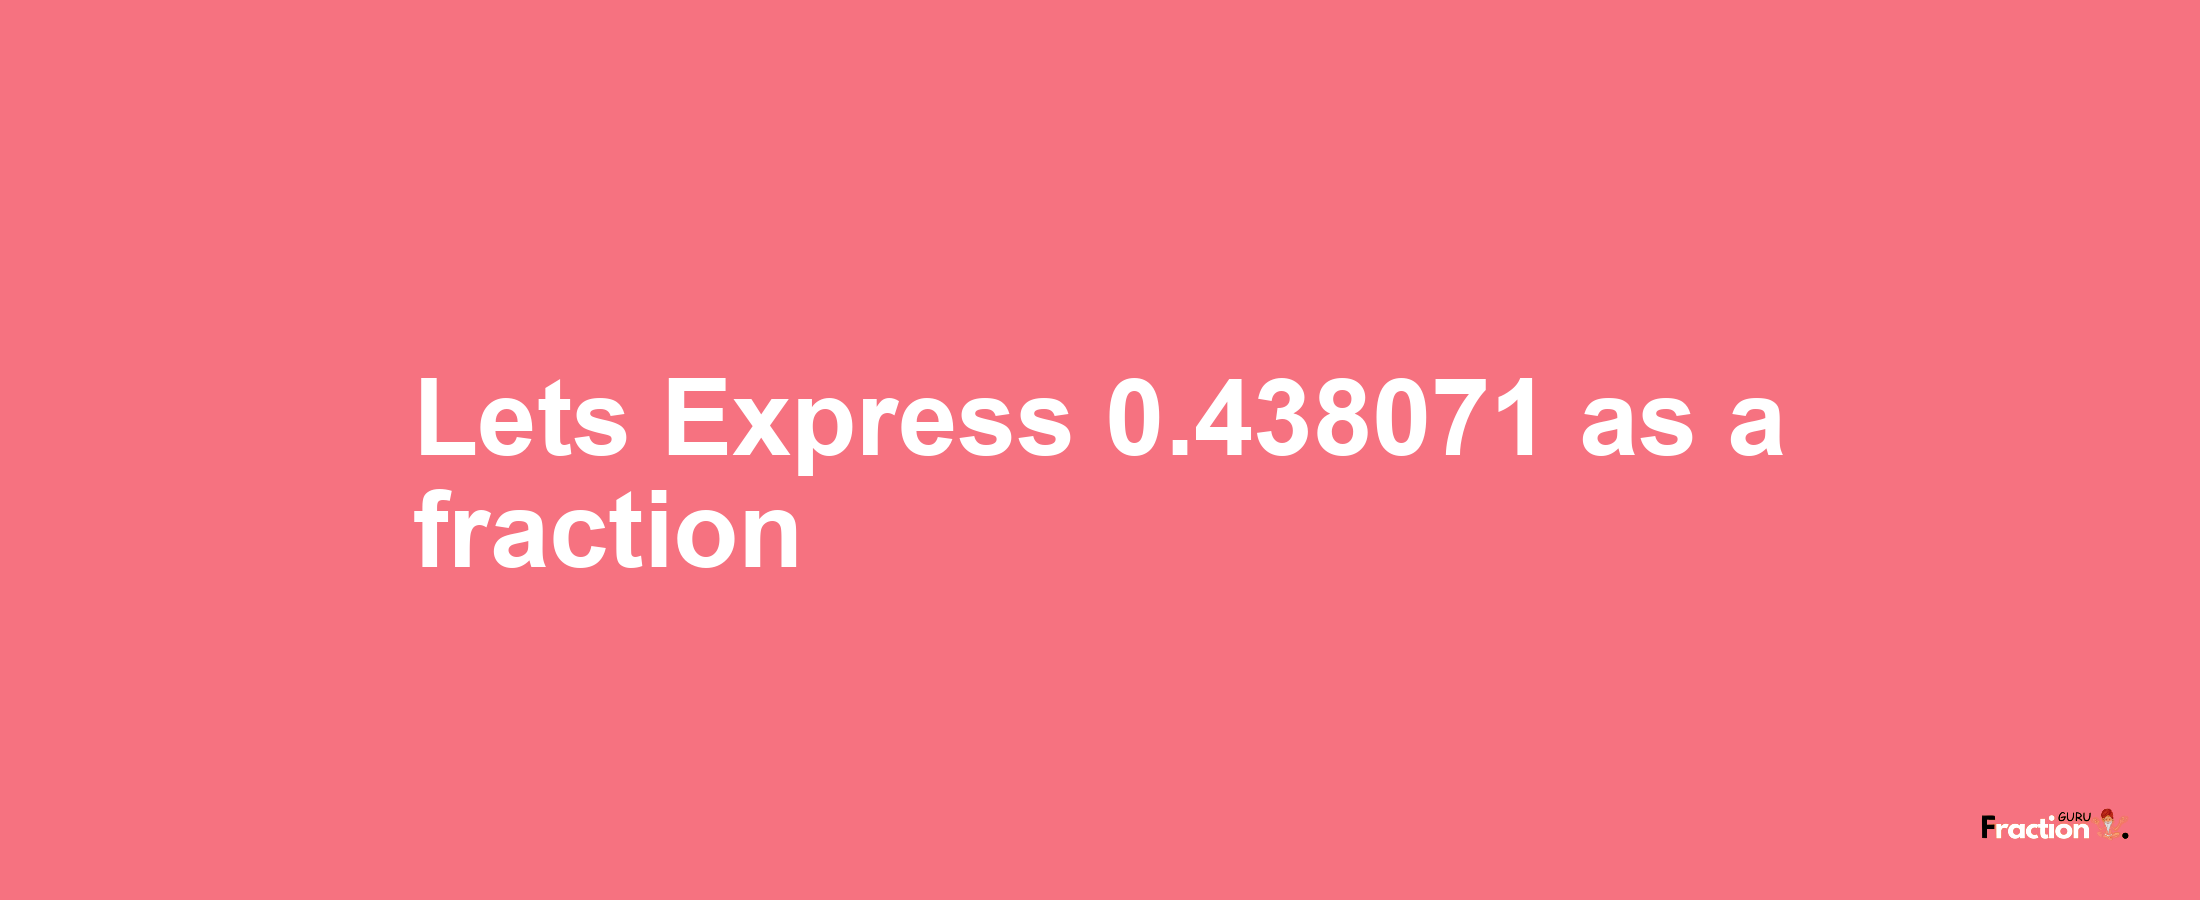 Lets Express 0.438071 as afraction